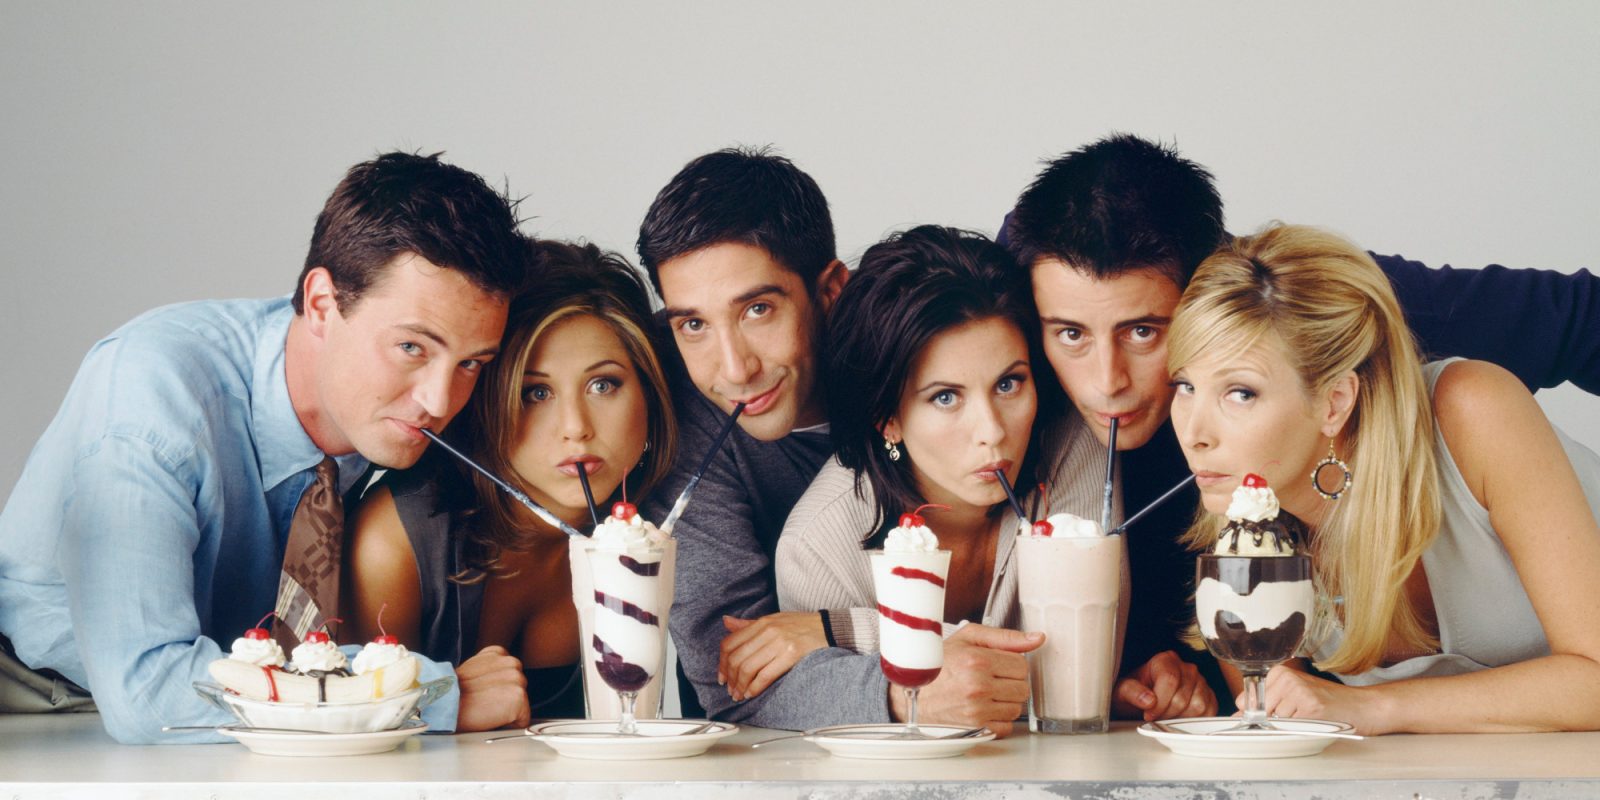 Enter to Win a Spot at HBO Max’s Live Taping of ‘Friends’ Reunion